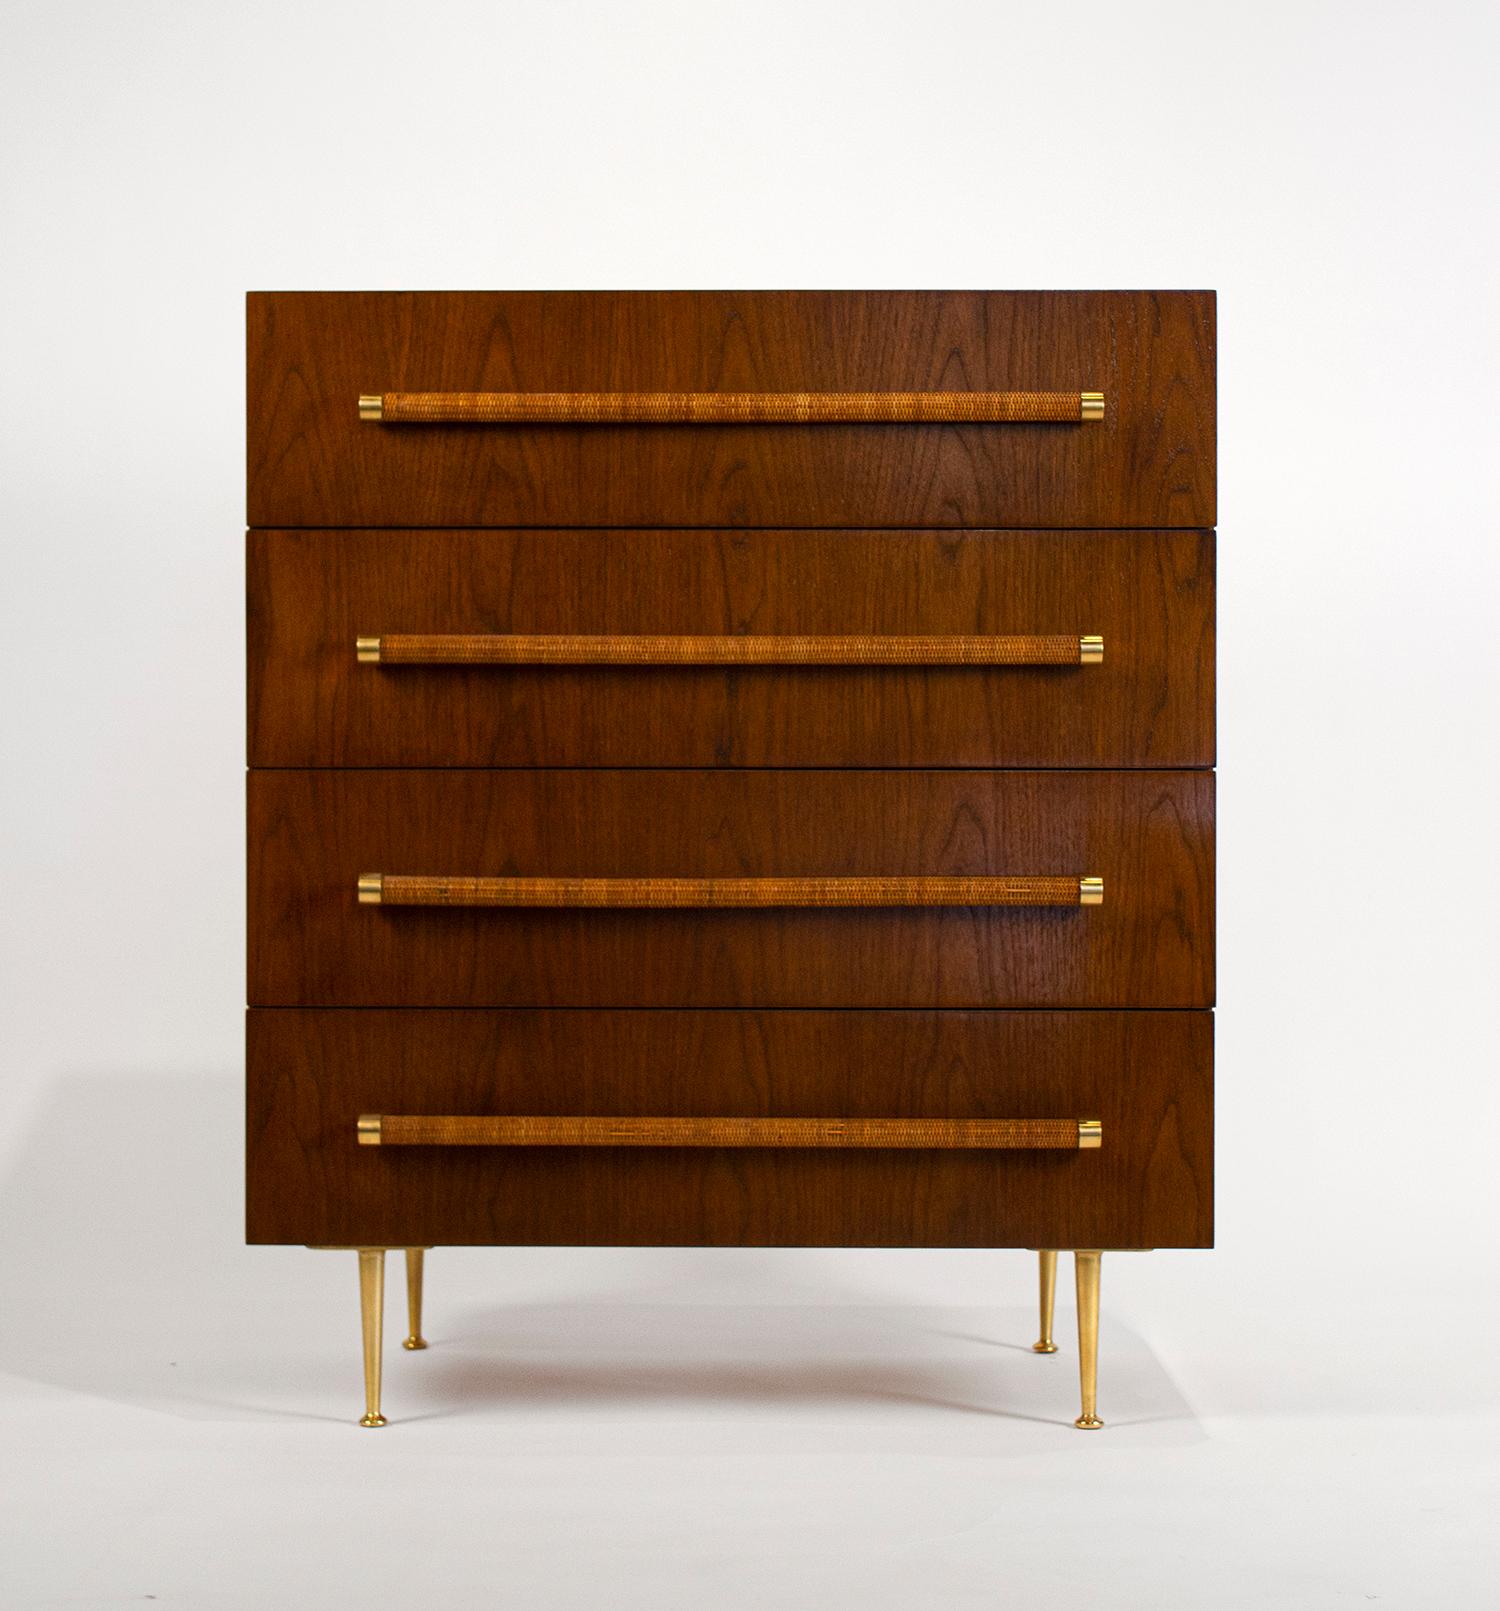 Bookmatched walnut chest of drawers with segmented oak interiors, woven cane wrapped handles, and solid polished brass hardware and feet. Signed with the Widdicomb label to the top drawers.